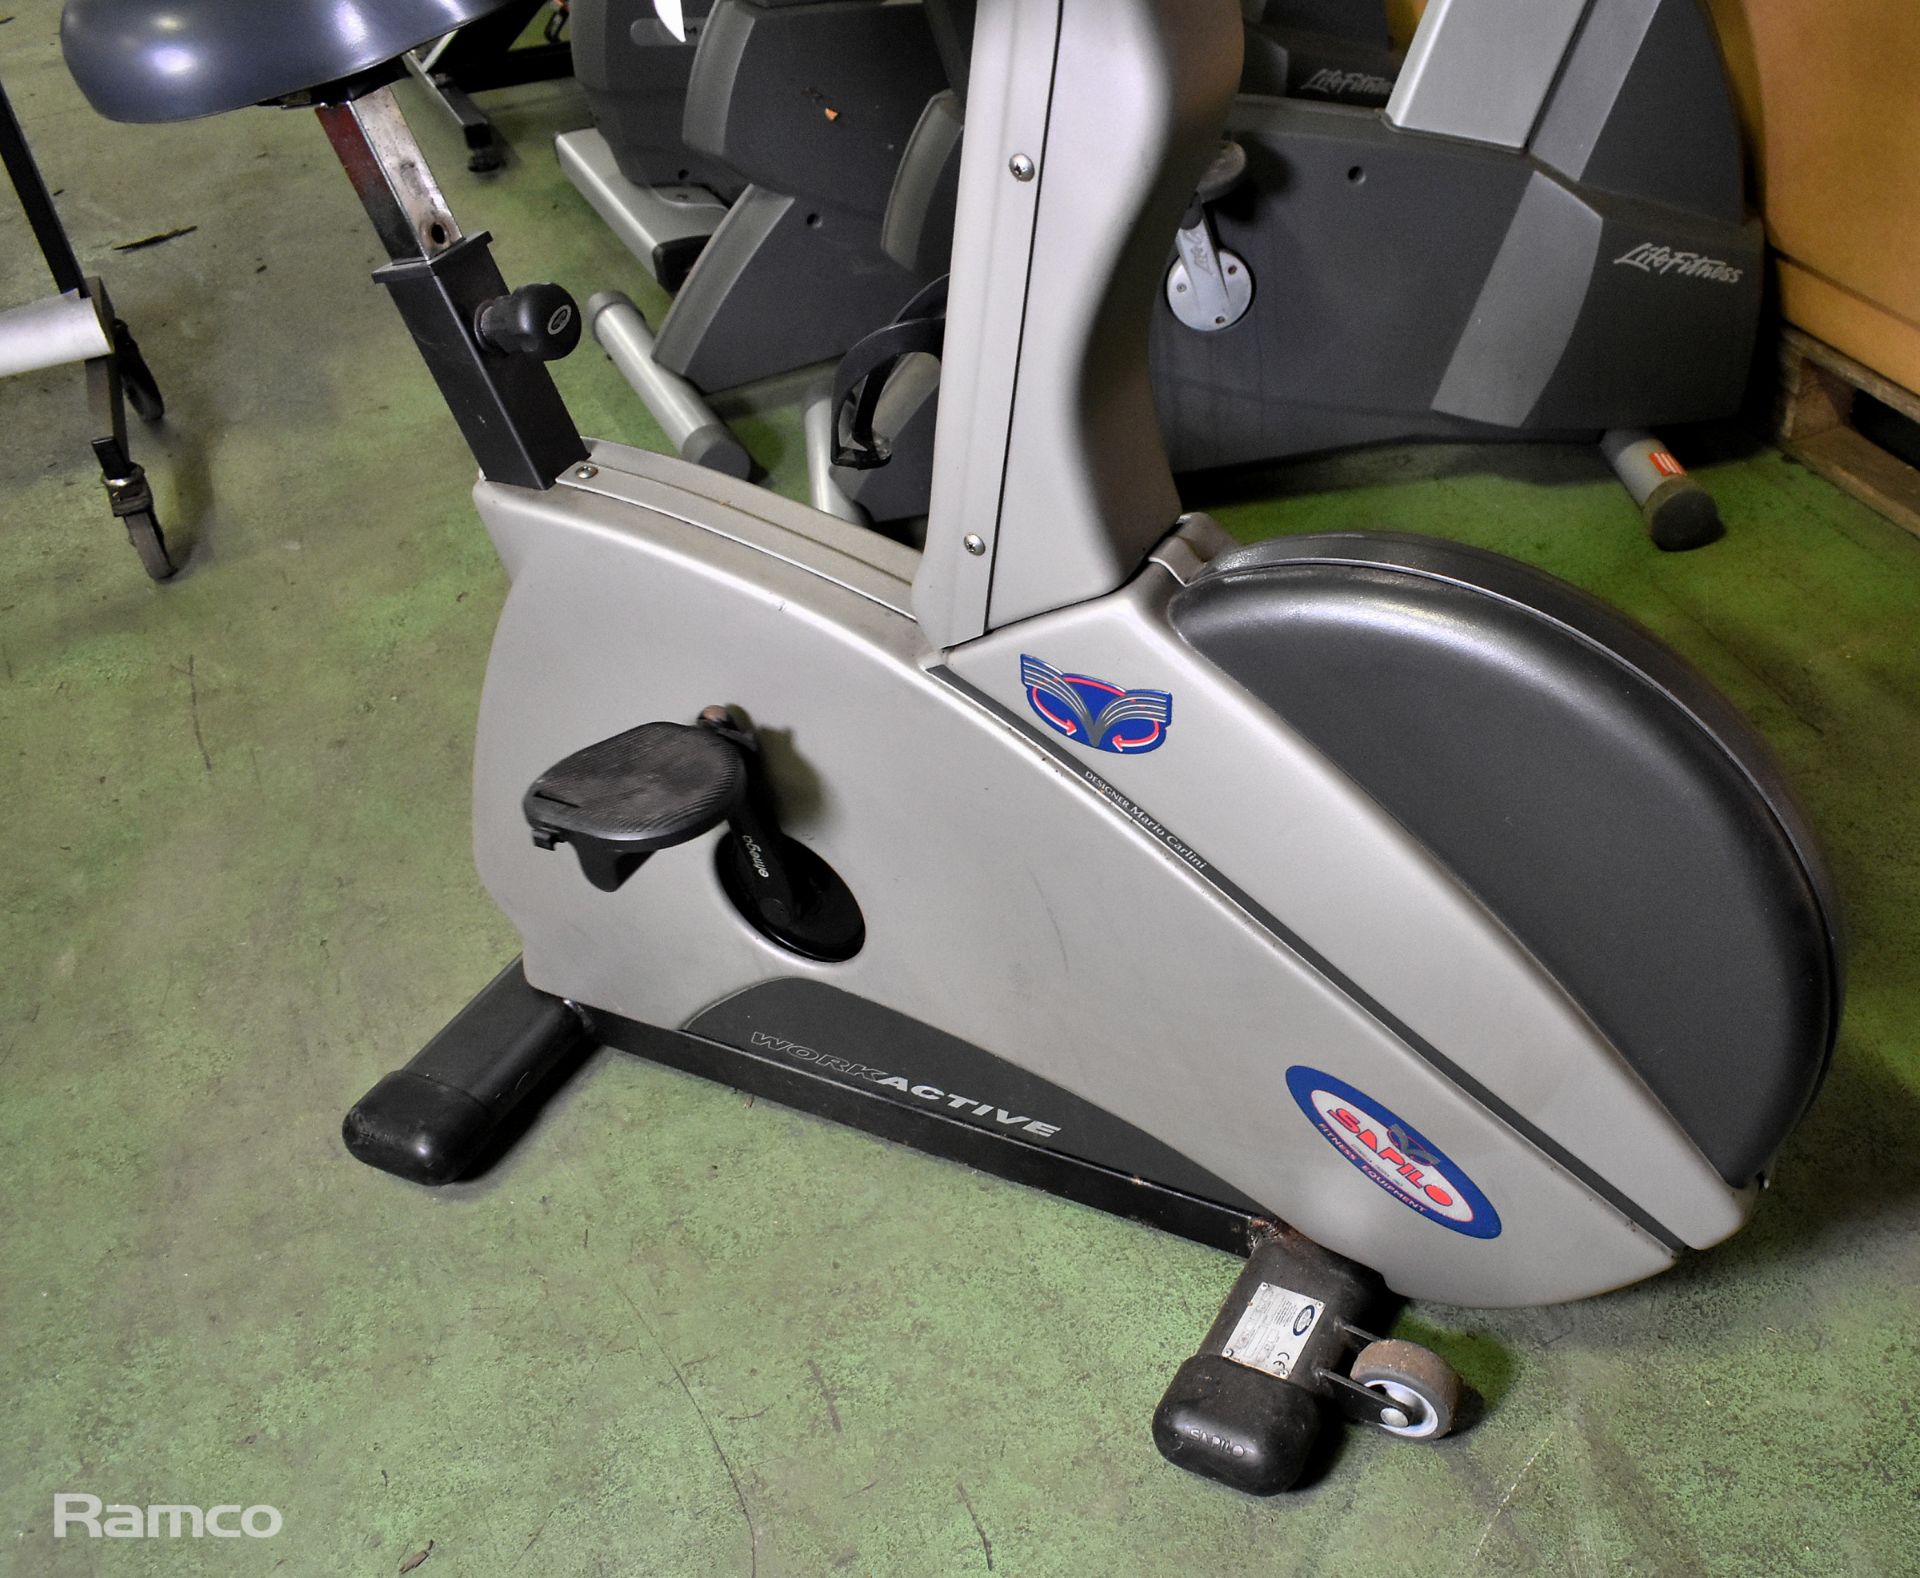 Sapilo WorkActive exercise bike - L 110 x W 48 x H 120cm - with Technogym seat - Image 5 of 8